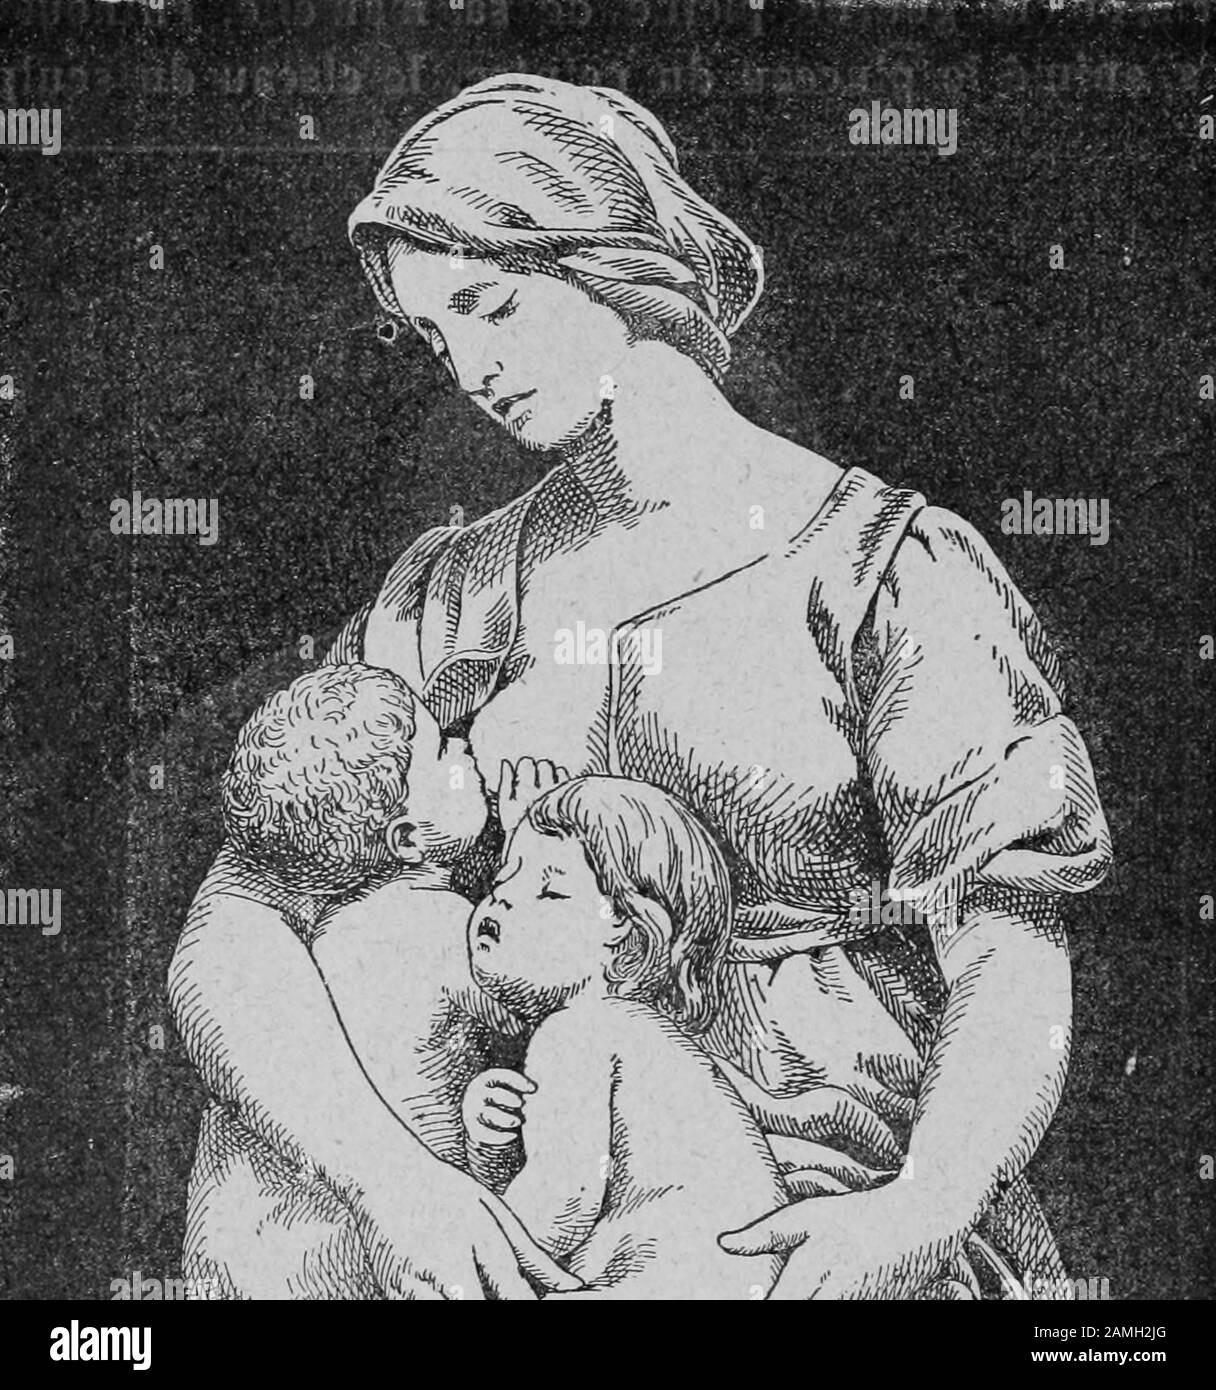 Illustration of the sculpture 'La Charite' by Paul Dubois, featuring a mother holding two children, breastfeeding one, taken from the book 'Curiosites Medico-Artistiques' by author Lucien Nass, published by La Librairie Mondiale, 1907. Courtesy Internet Archive. () Stock Photo